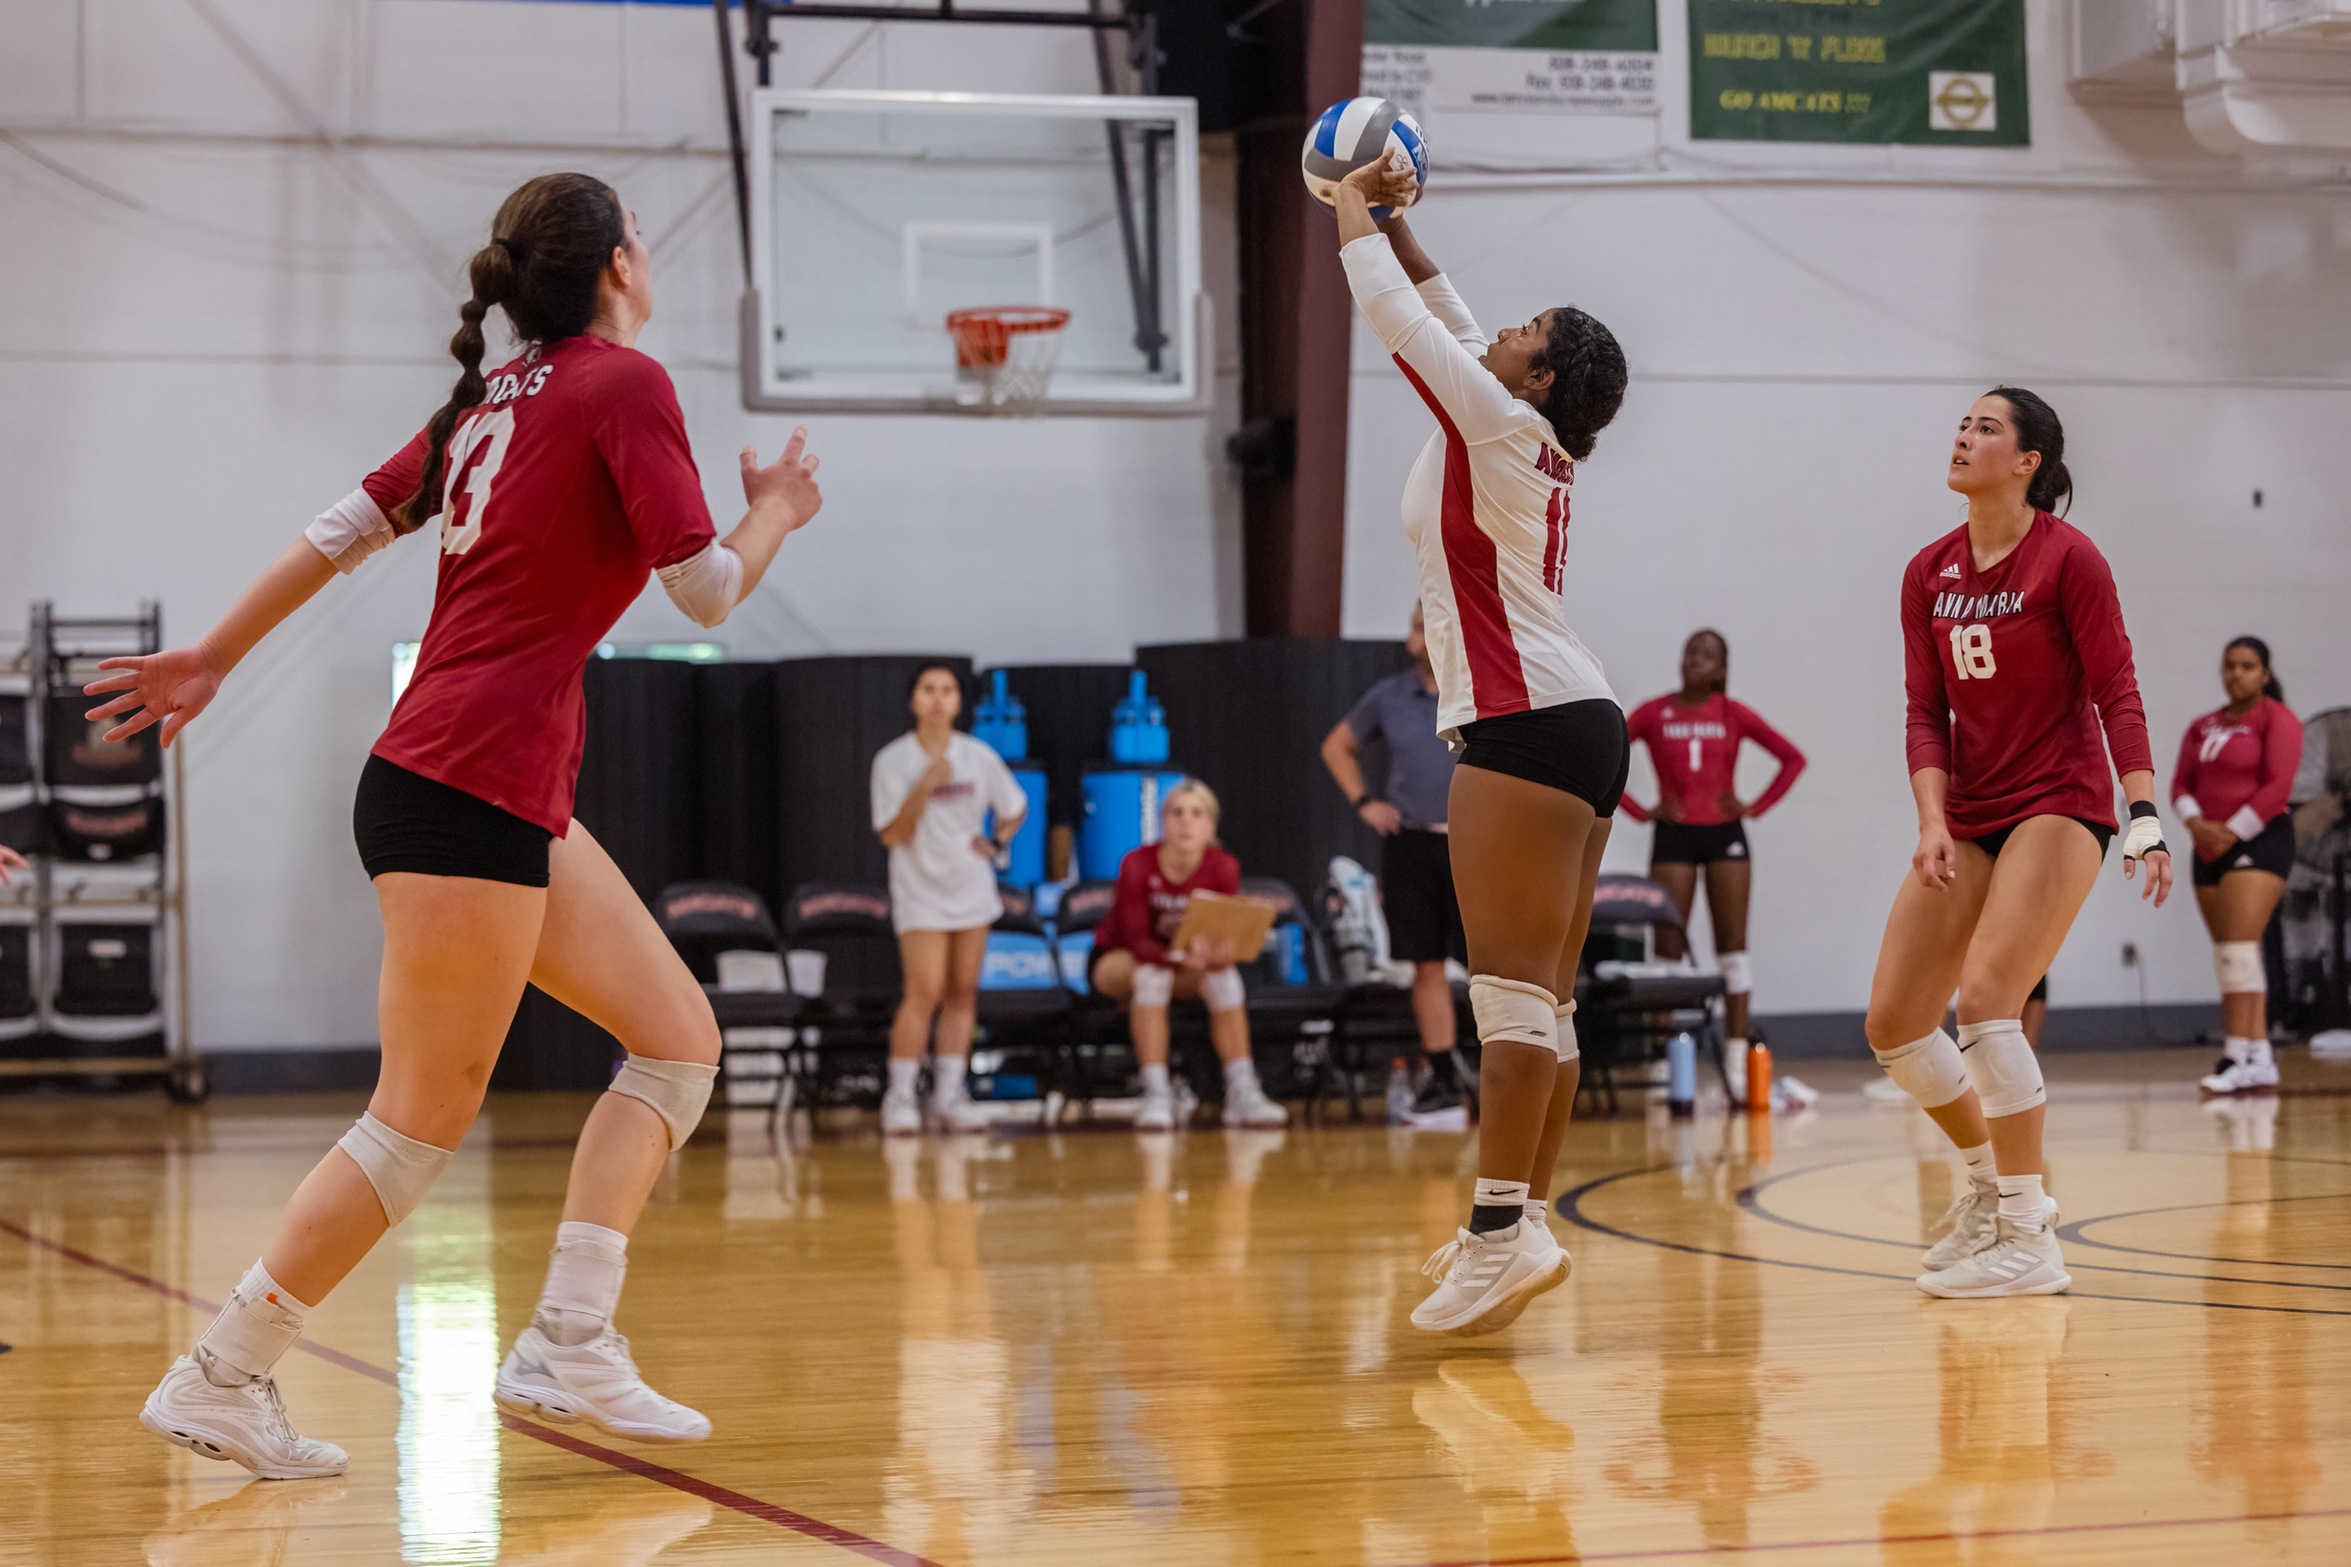 Women’s Volleyball Puts Up A Fight Against Bison